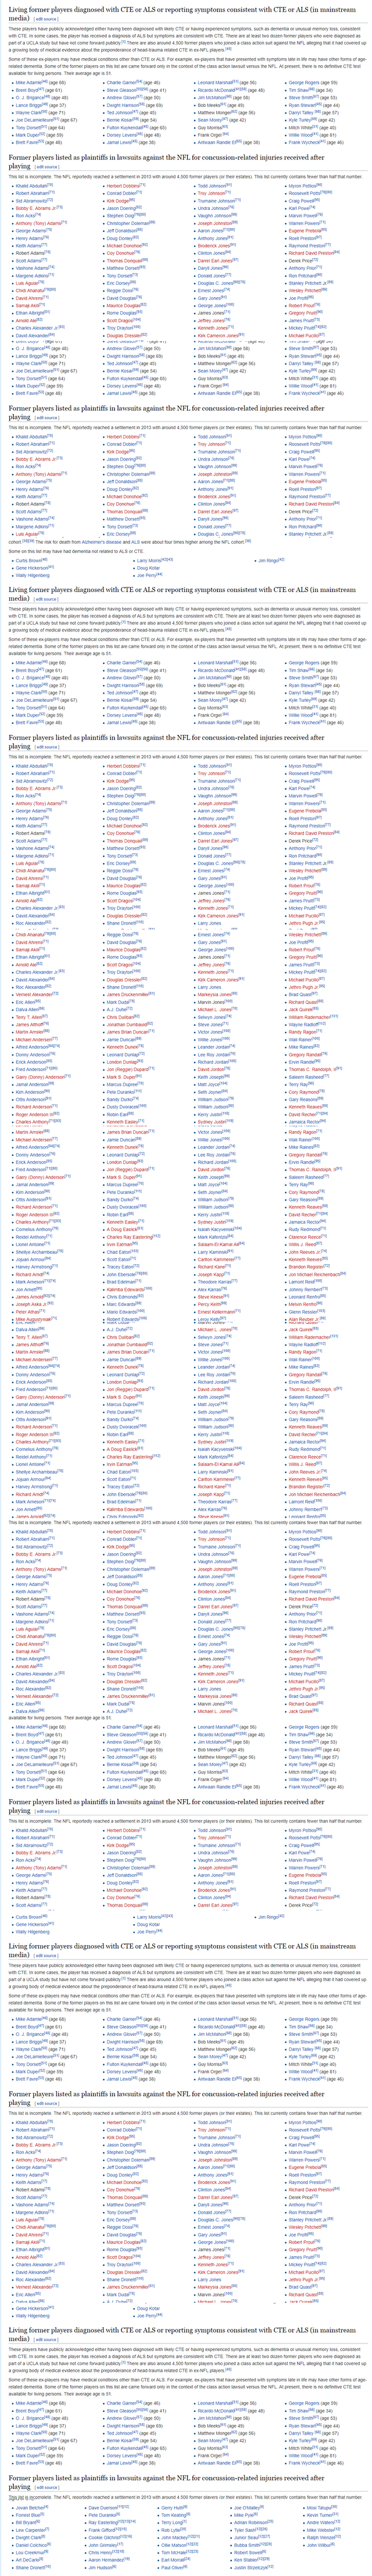 List of NFL players with chronic traumatic encephalopathy - Wikipedia.png